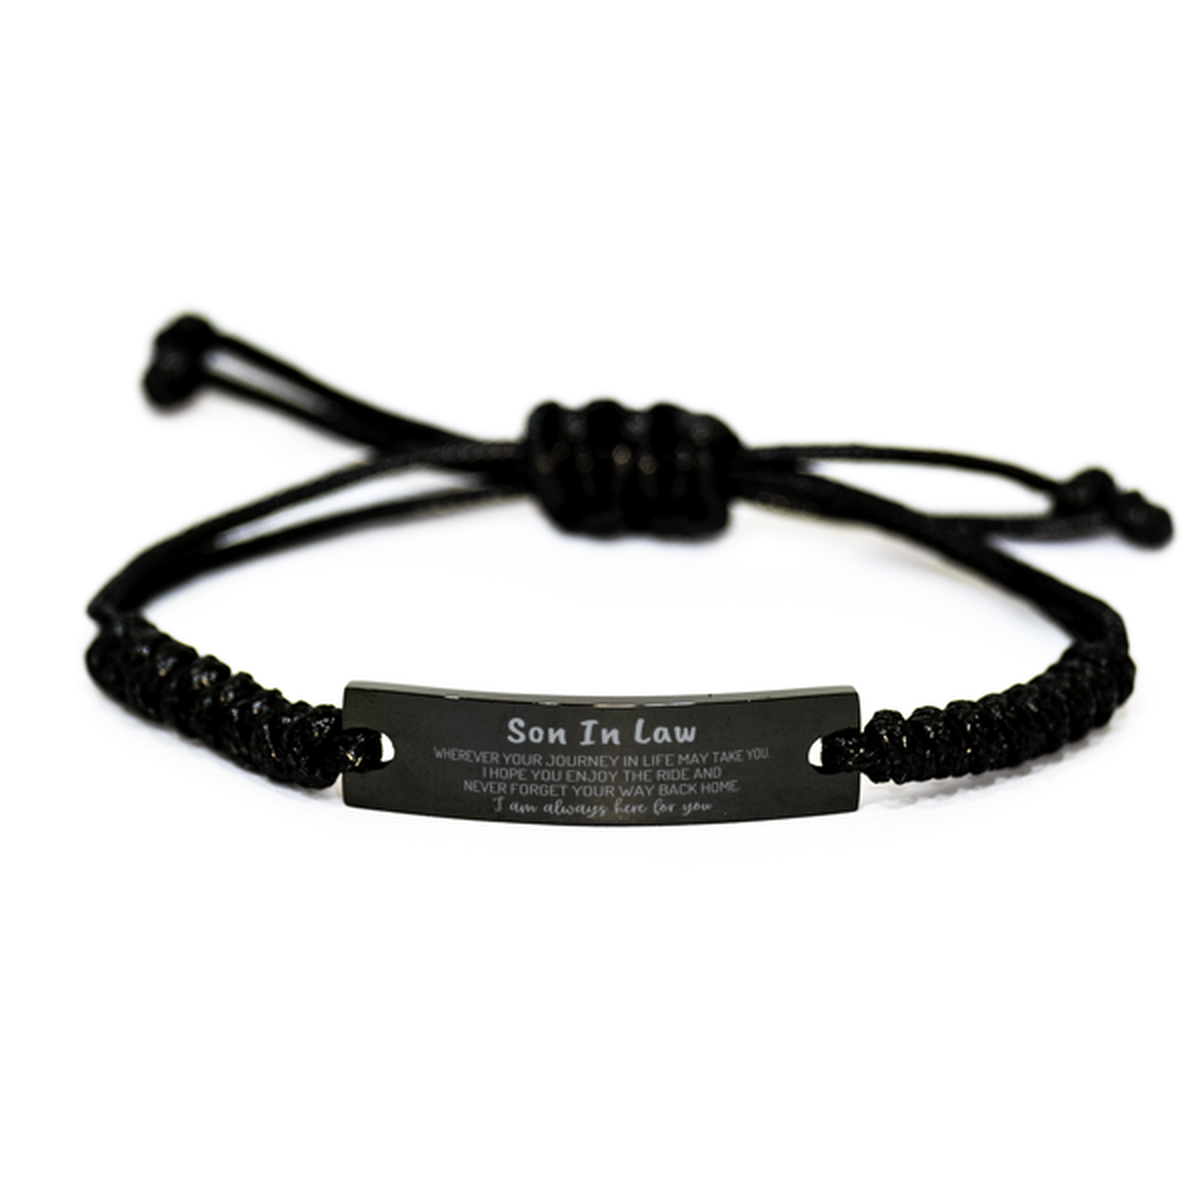 Son In Law wherever your journey in life may take you, I am always here for you Son In Law Black Rope Bracelet, Awesome Christmas Gifts For Son In Law, Son In Law Birthday Gifts for Men Women Family Loved One